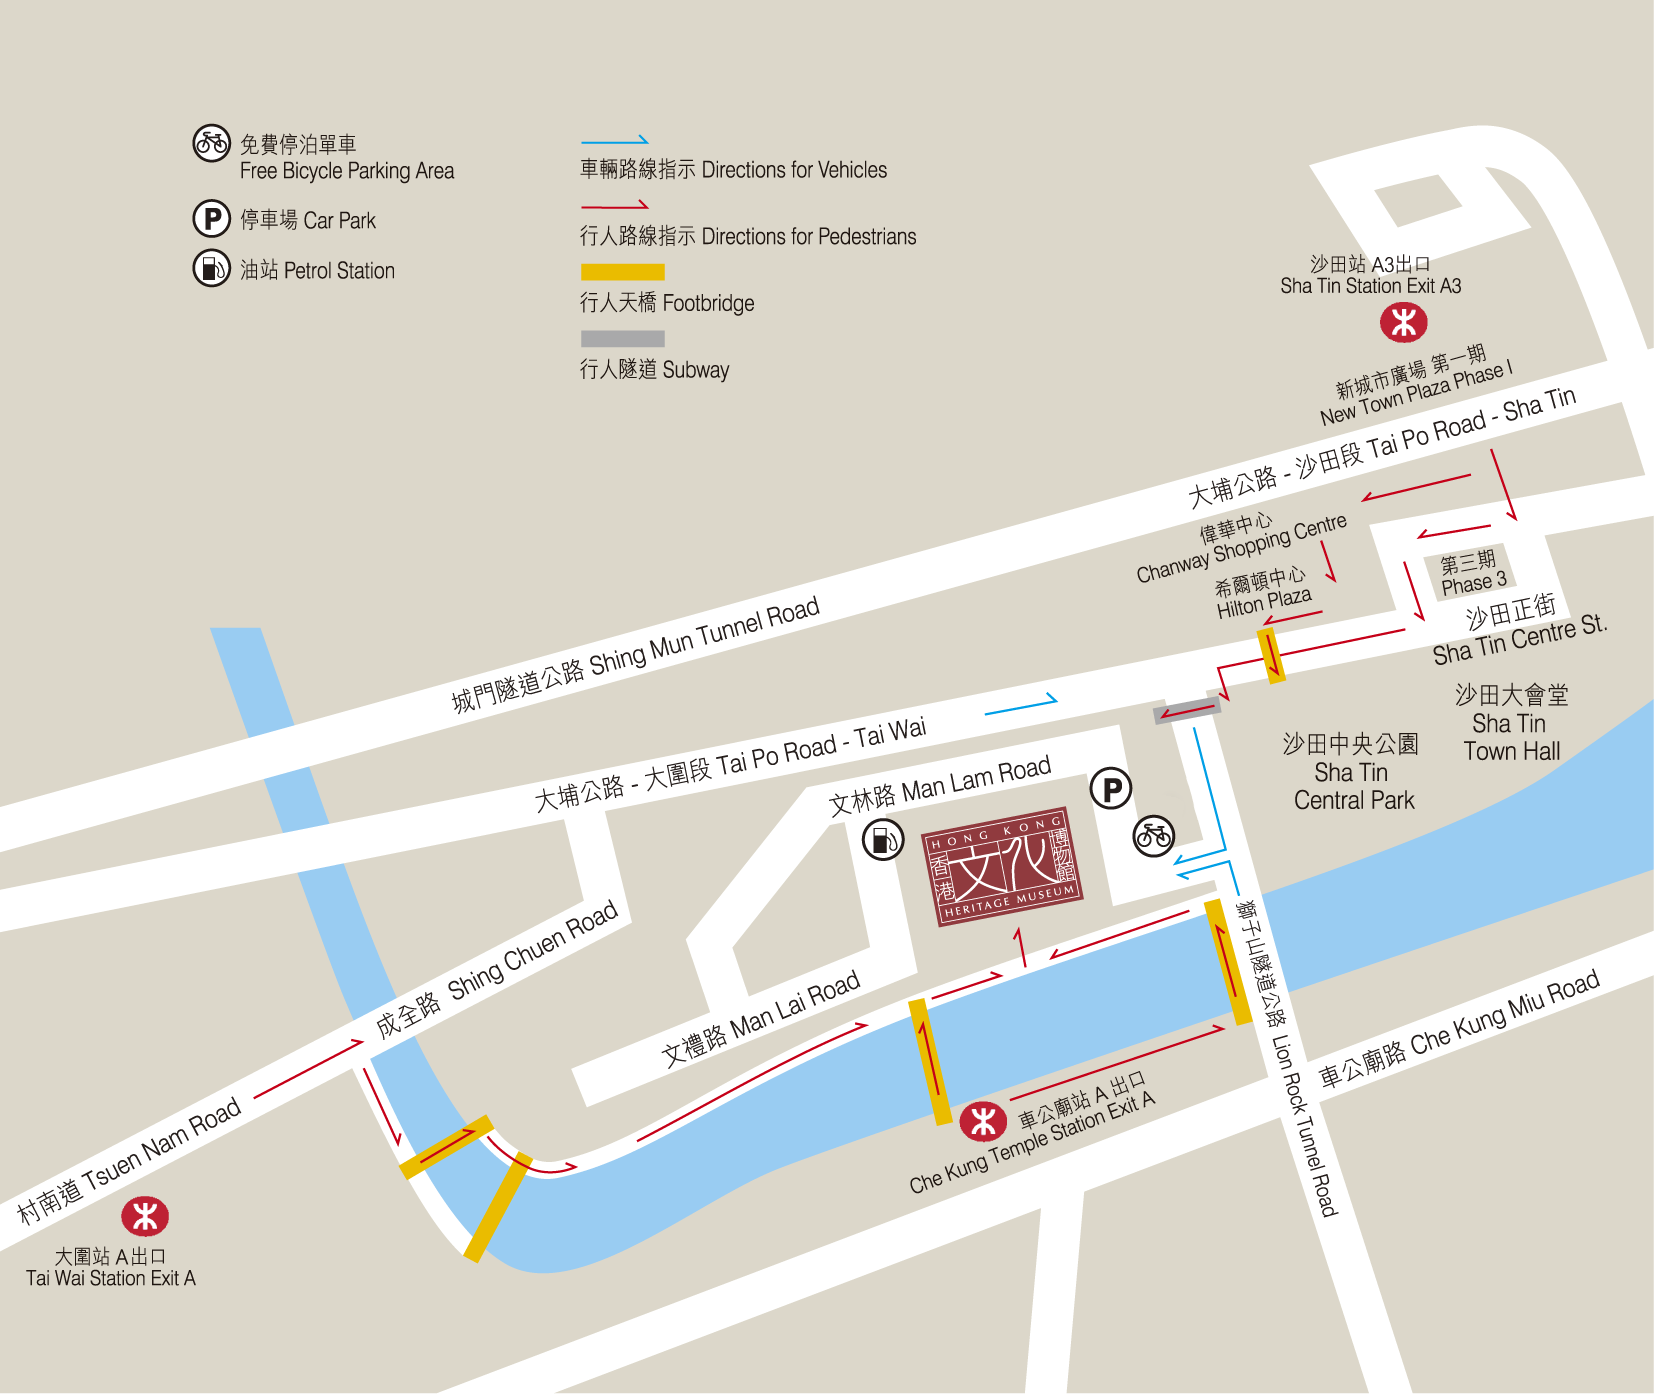 By taking the MTR, you can travel to the museum via Sha Tin Station, Tai Wai Station or Che Kung Temple Station.